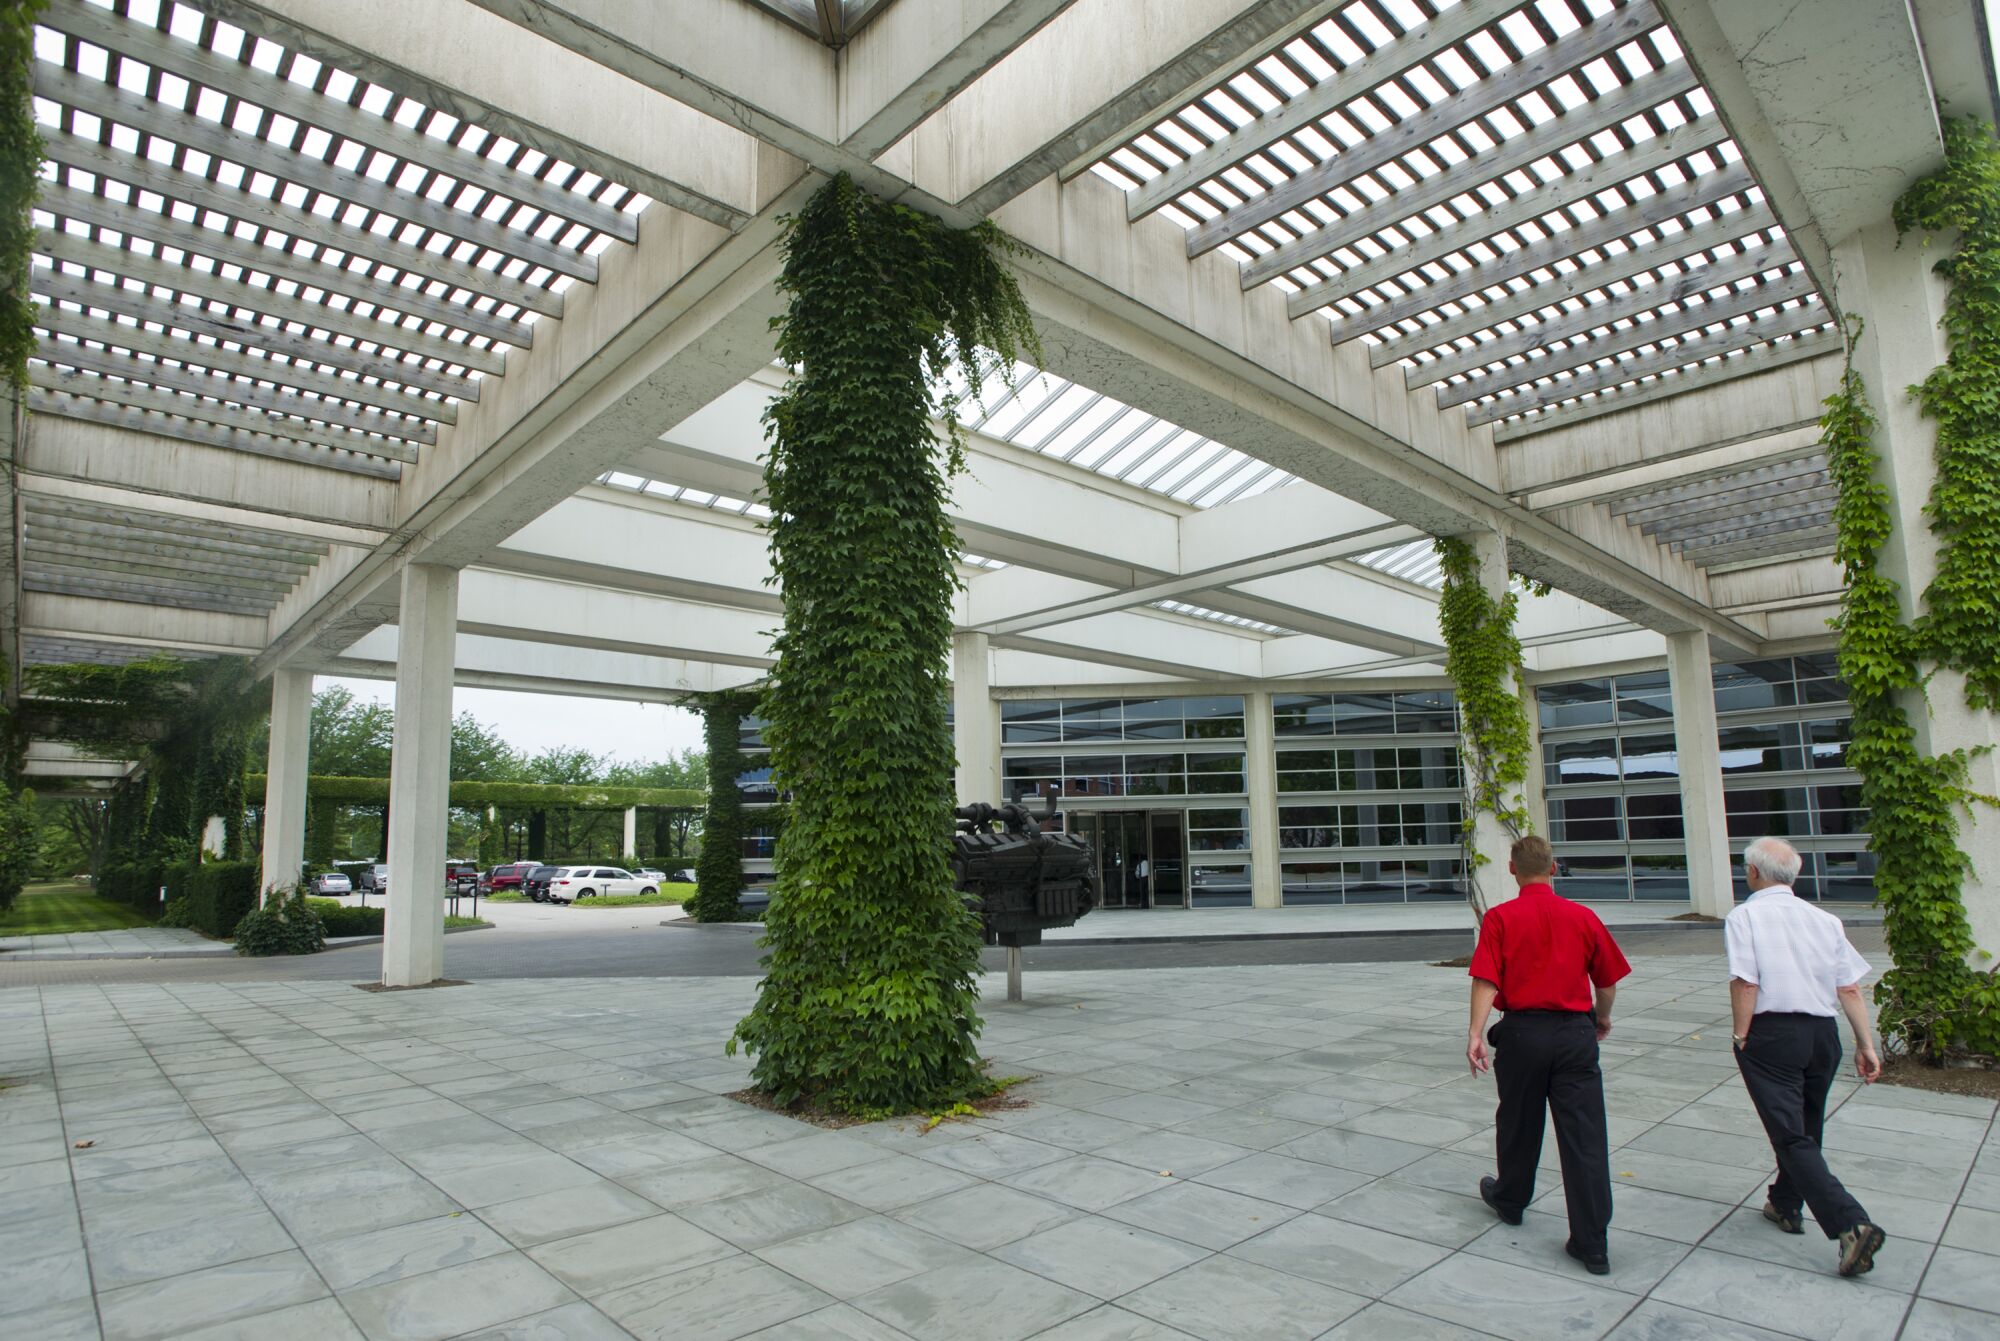 People walk through a partially covered courtyard at the Cummins corporate offices in Columbus, Ind.